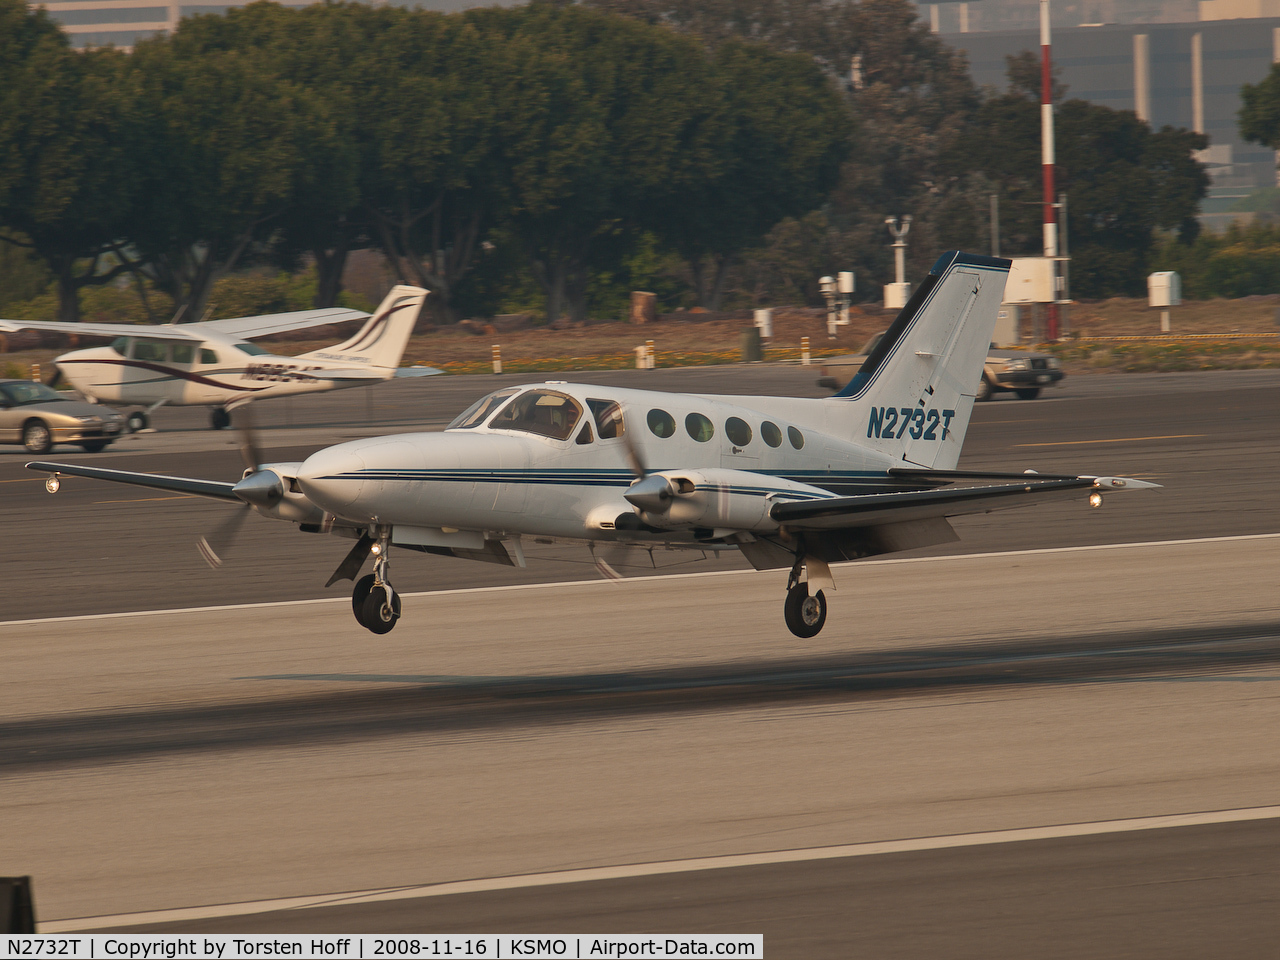 N2732T, 1979 Cessna 414A Chancellor C/N 414A0449, N2732T arriving on RWY 21